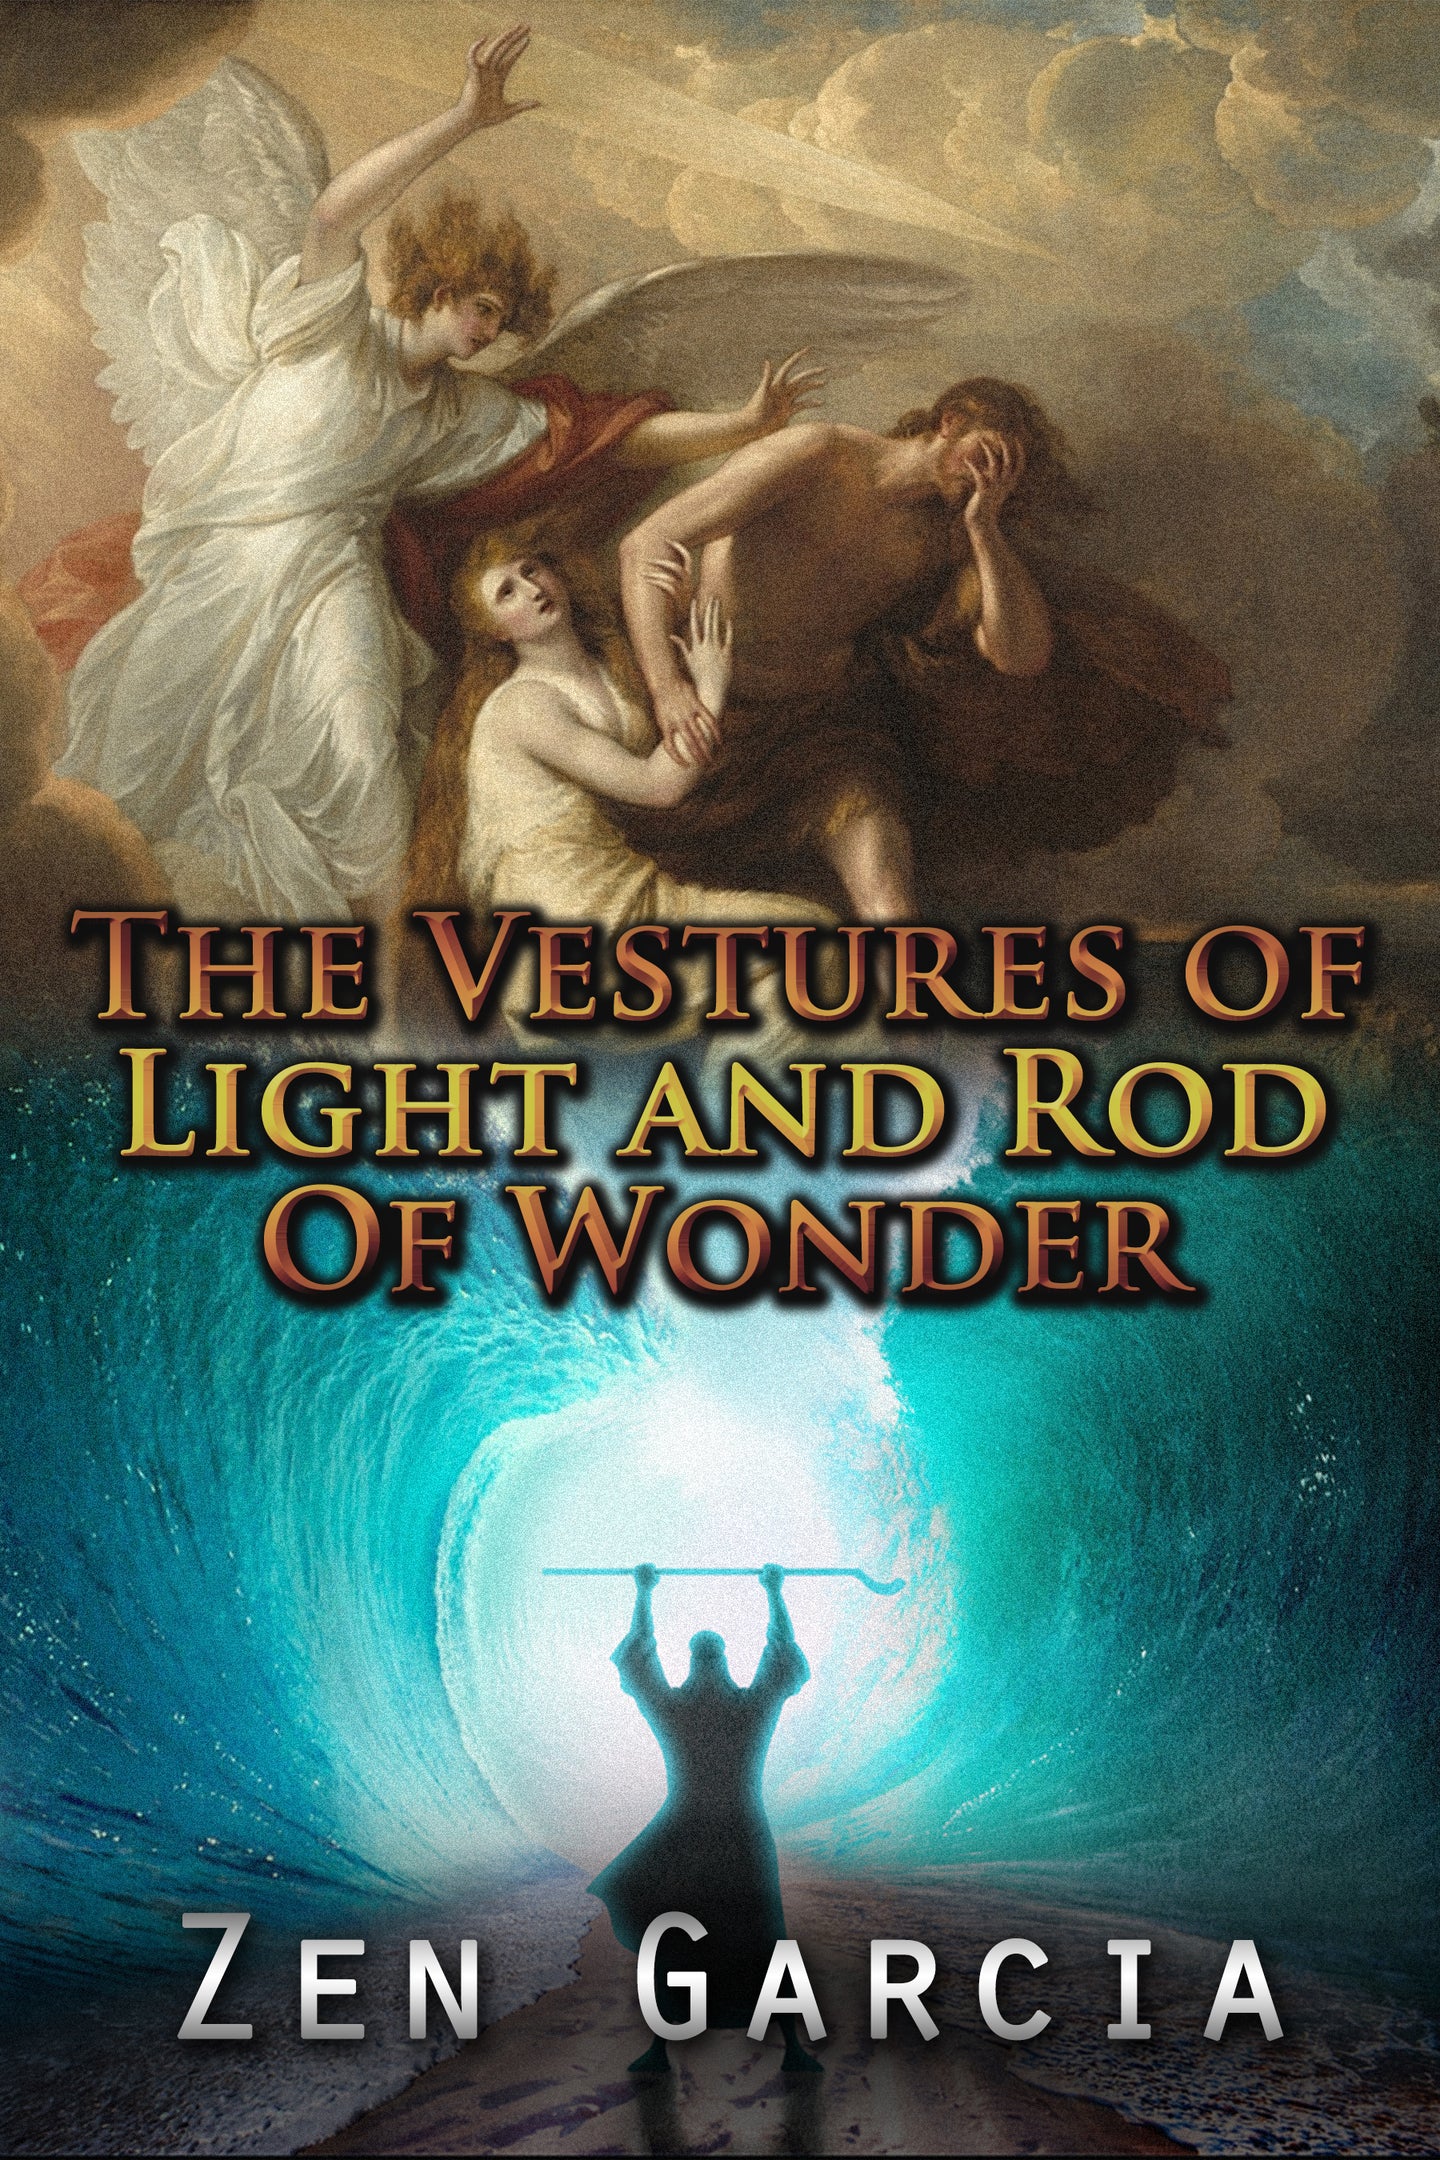 The Vestures of Light and Rod of Wonder